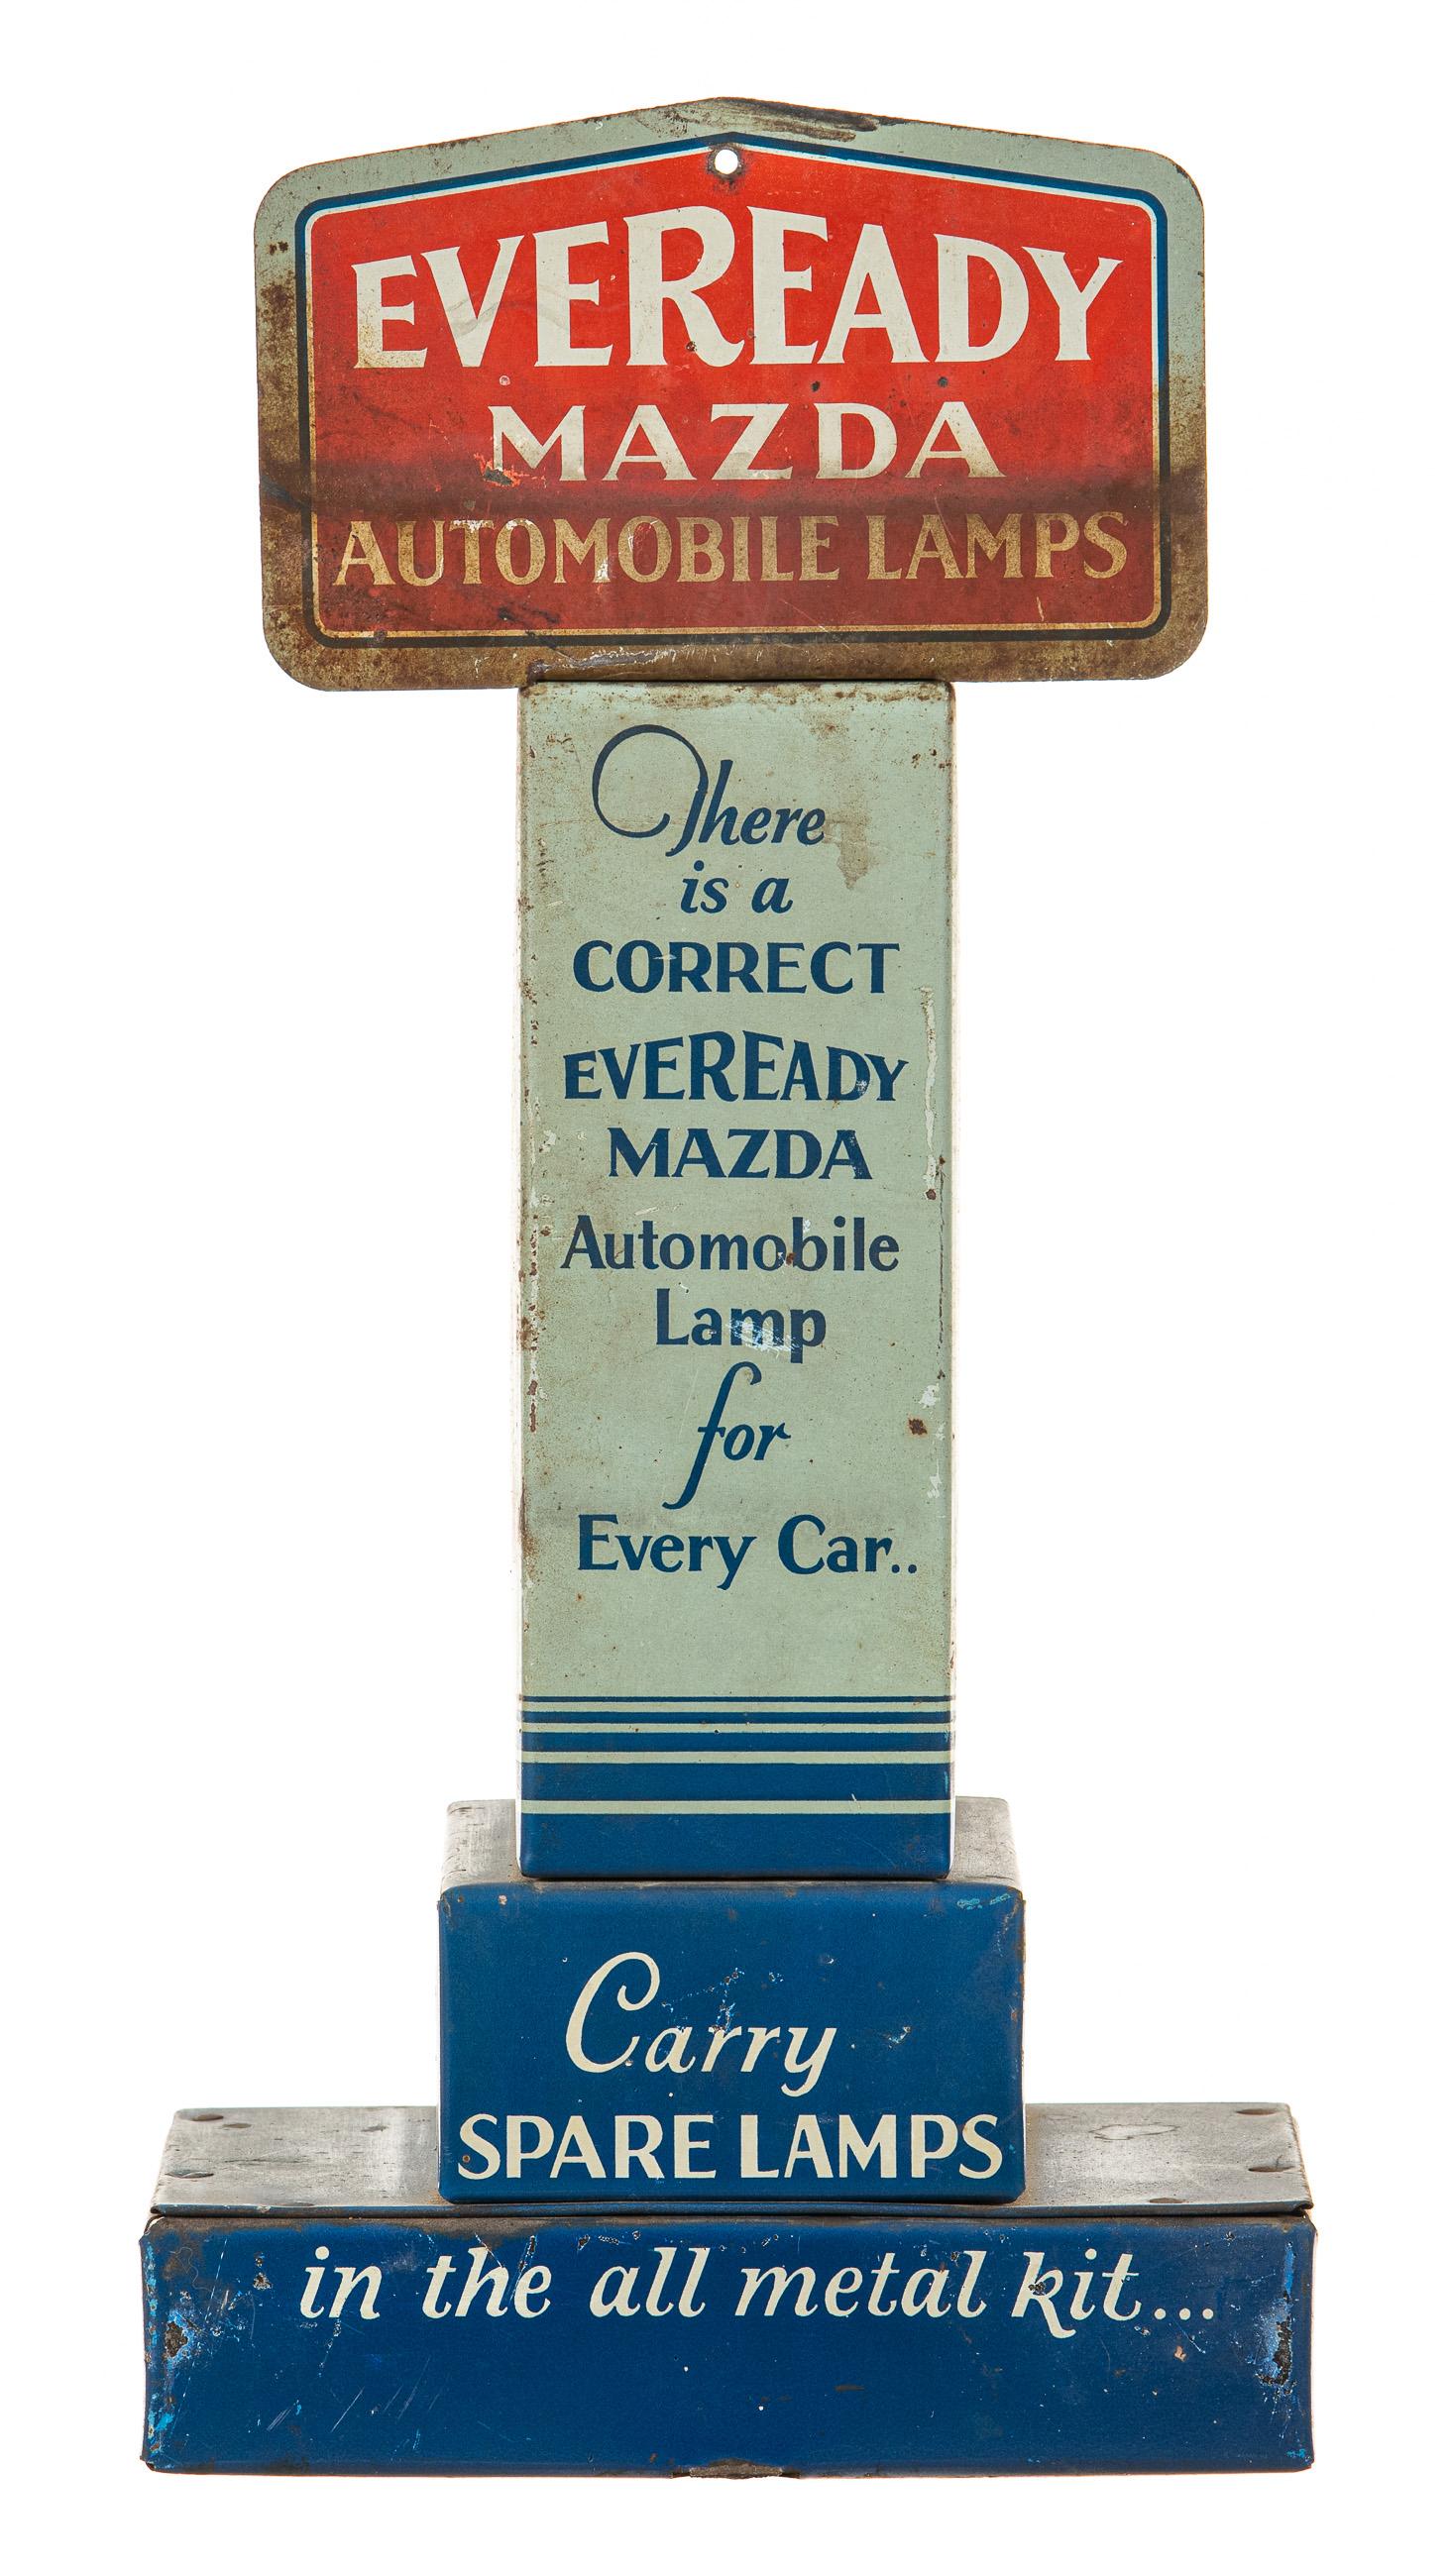 Eveready Mazda Automobile Lamps Counter Display